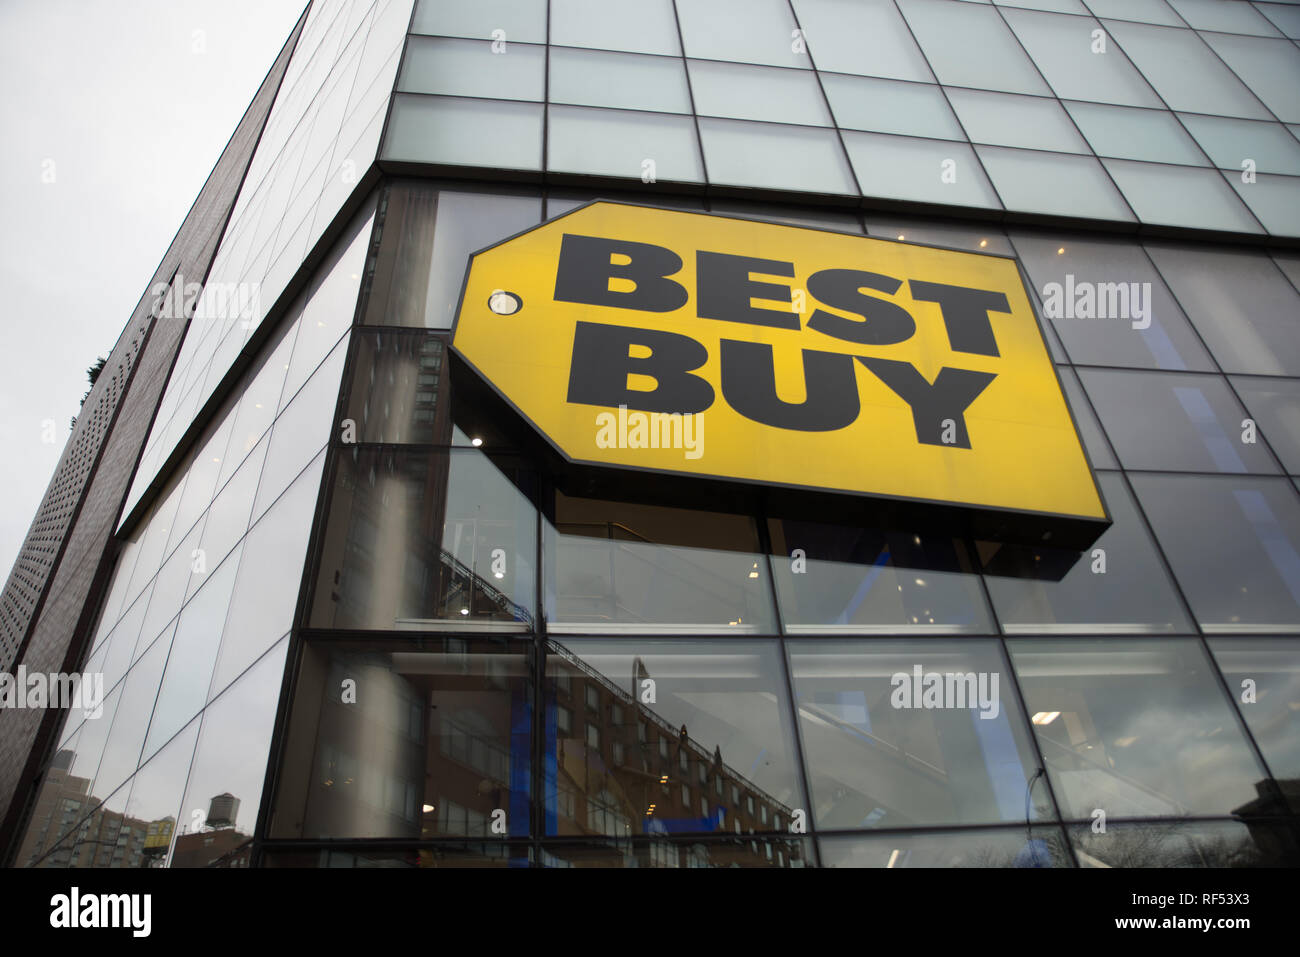 NEW YORK, NY – January 29 2010: Best Buy logo sign hanging outside store front in Union Square New York location from a down to up angle Stock Photo